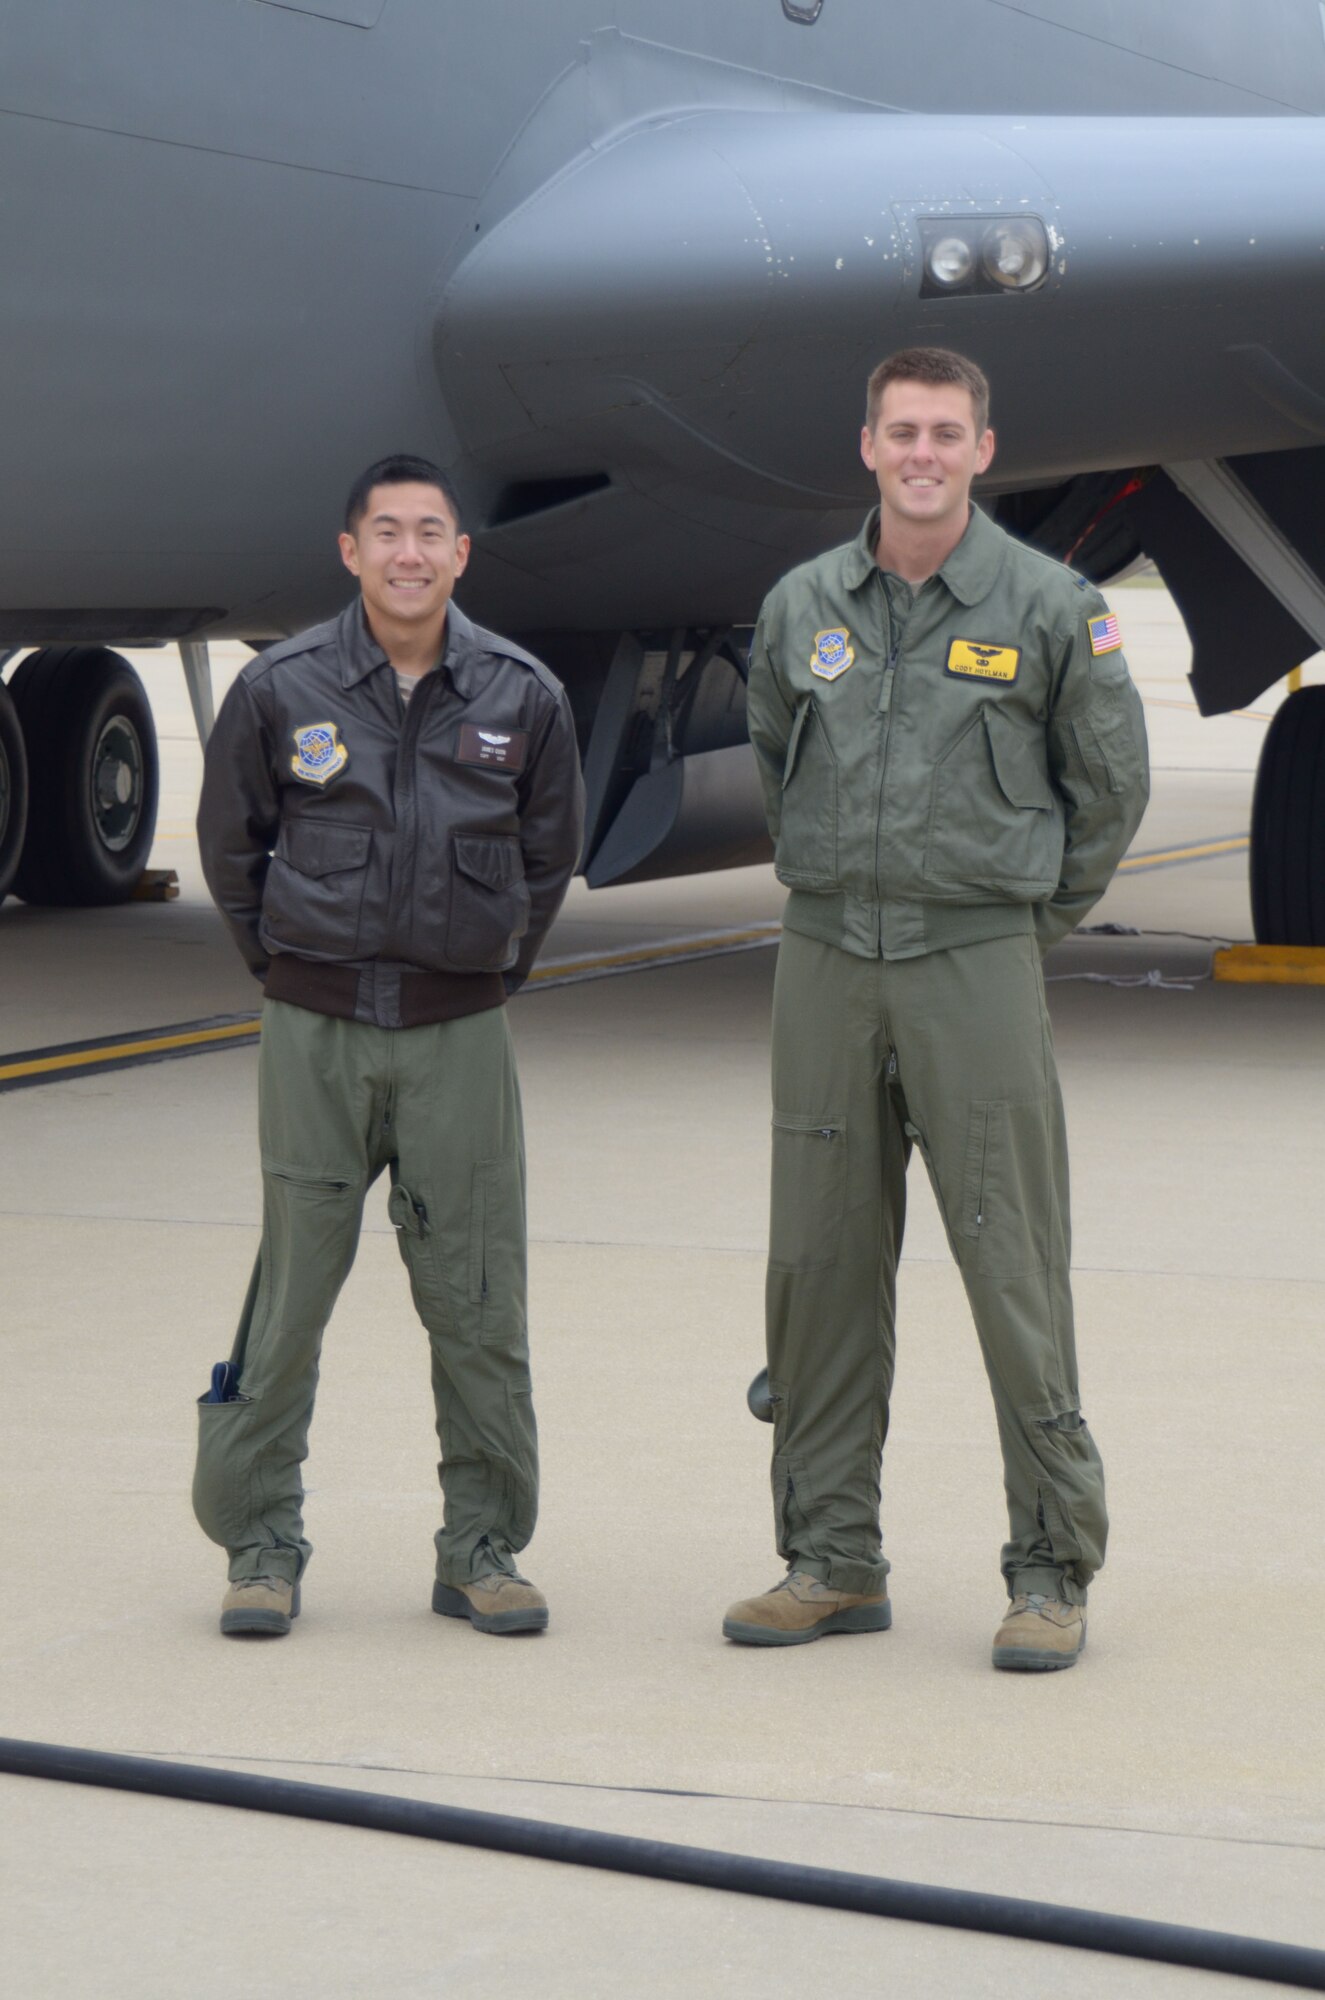 1st Lt. Cody Hoylman and Capt. James Quon, both pilots for the 906th Air Refueling Squadron assigned to the 126 Air Refueling Wing, Scott Air Force Base, Ill., were recently selected for the initial operational test and evaluation aircrew for the KC-46 Pegasus. The active duty Air Force pilots currently fly the KC-135R Stratotanker for the Illinois Air National Guard under an Active Association. (Air National Guard photo by Senior Airman Elise Stout)